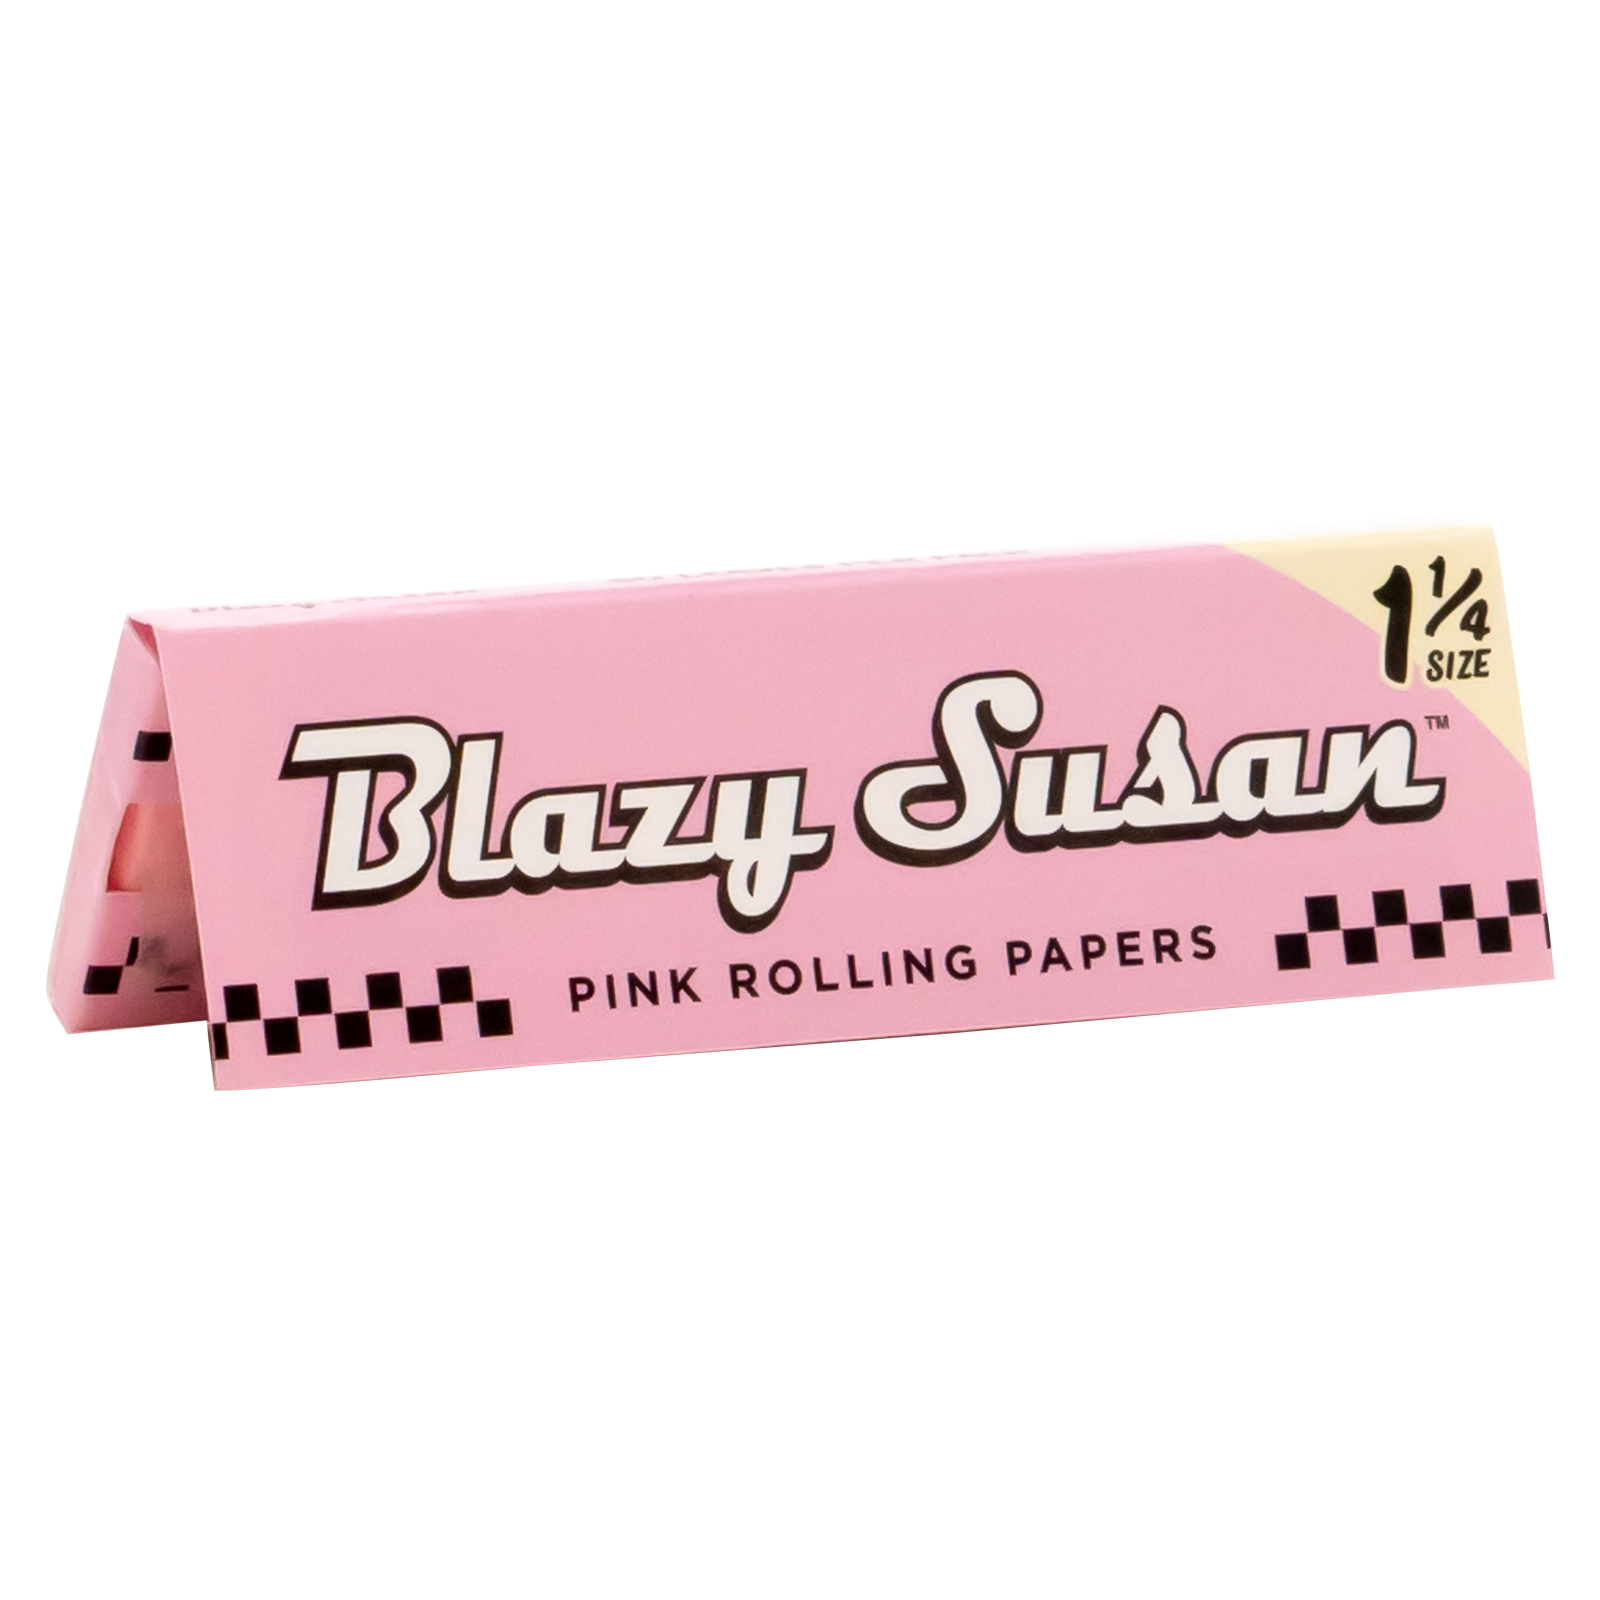 Blazy Susan 1-1/4" Pink Rolling Papers